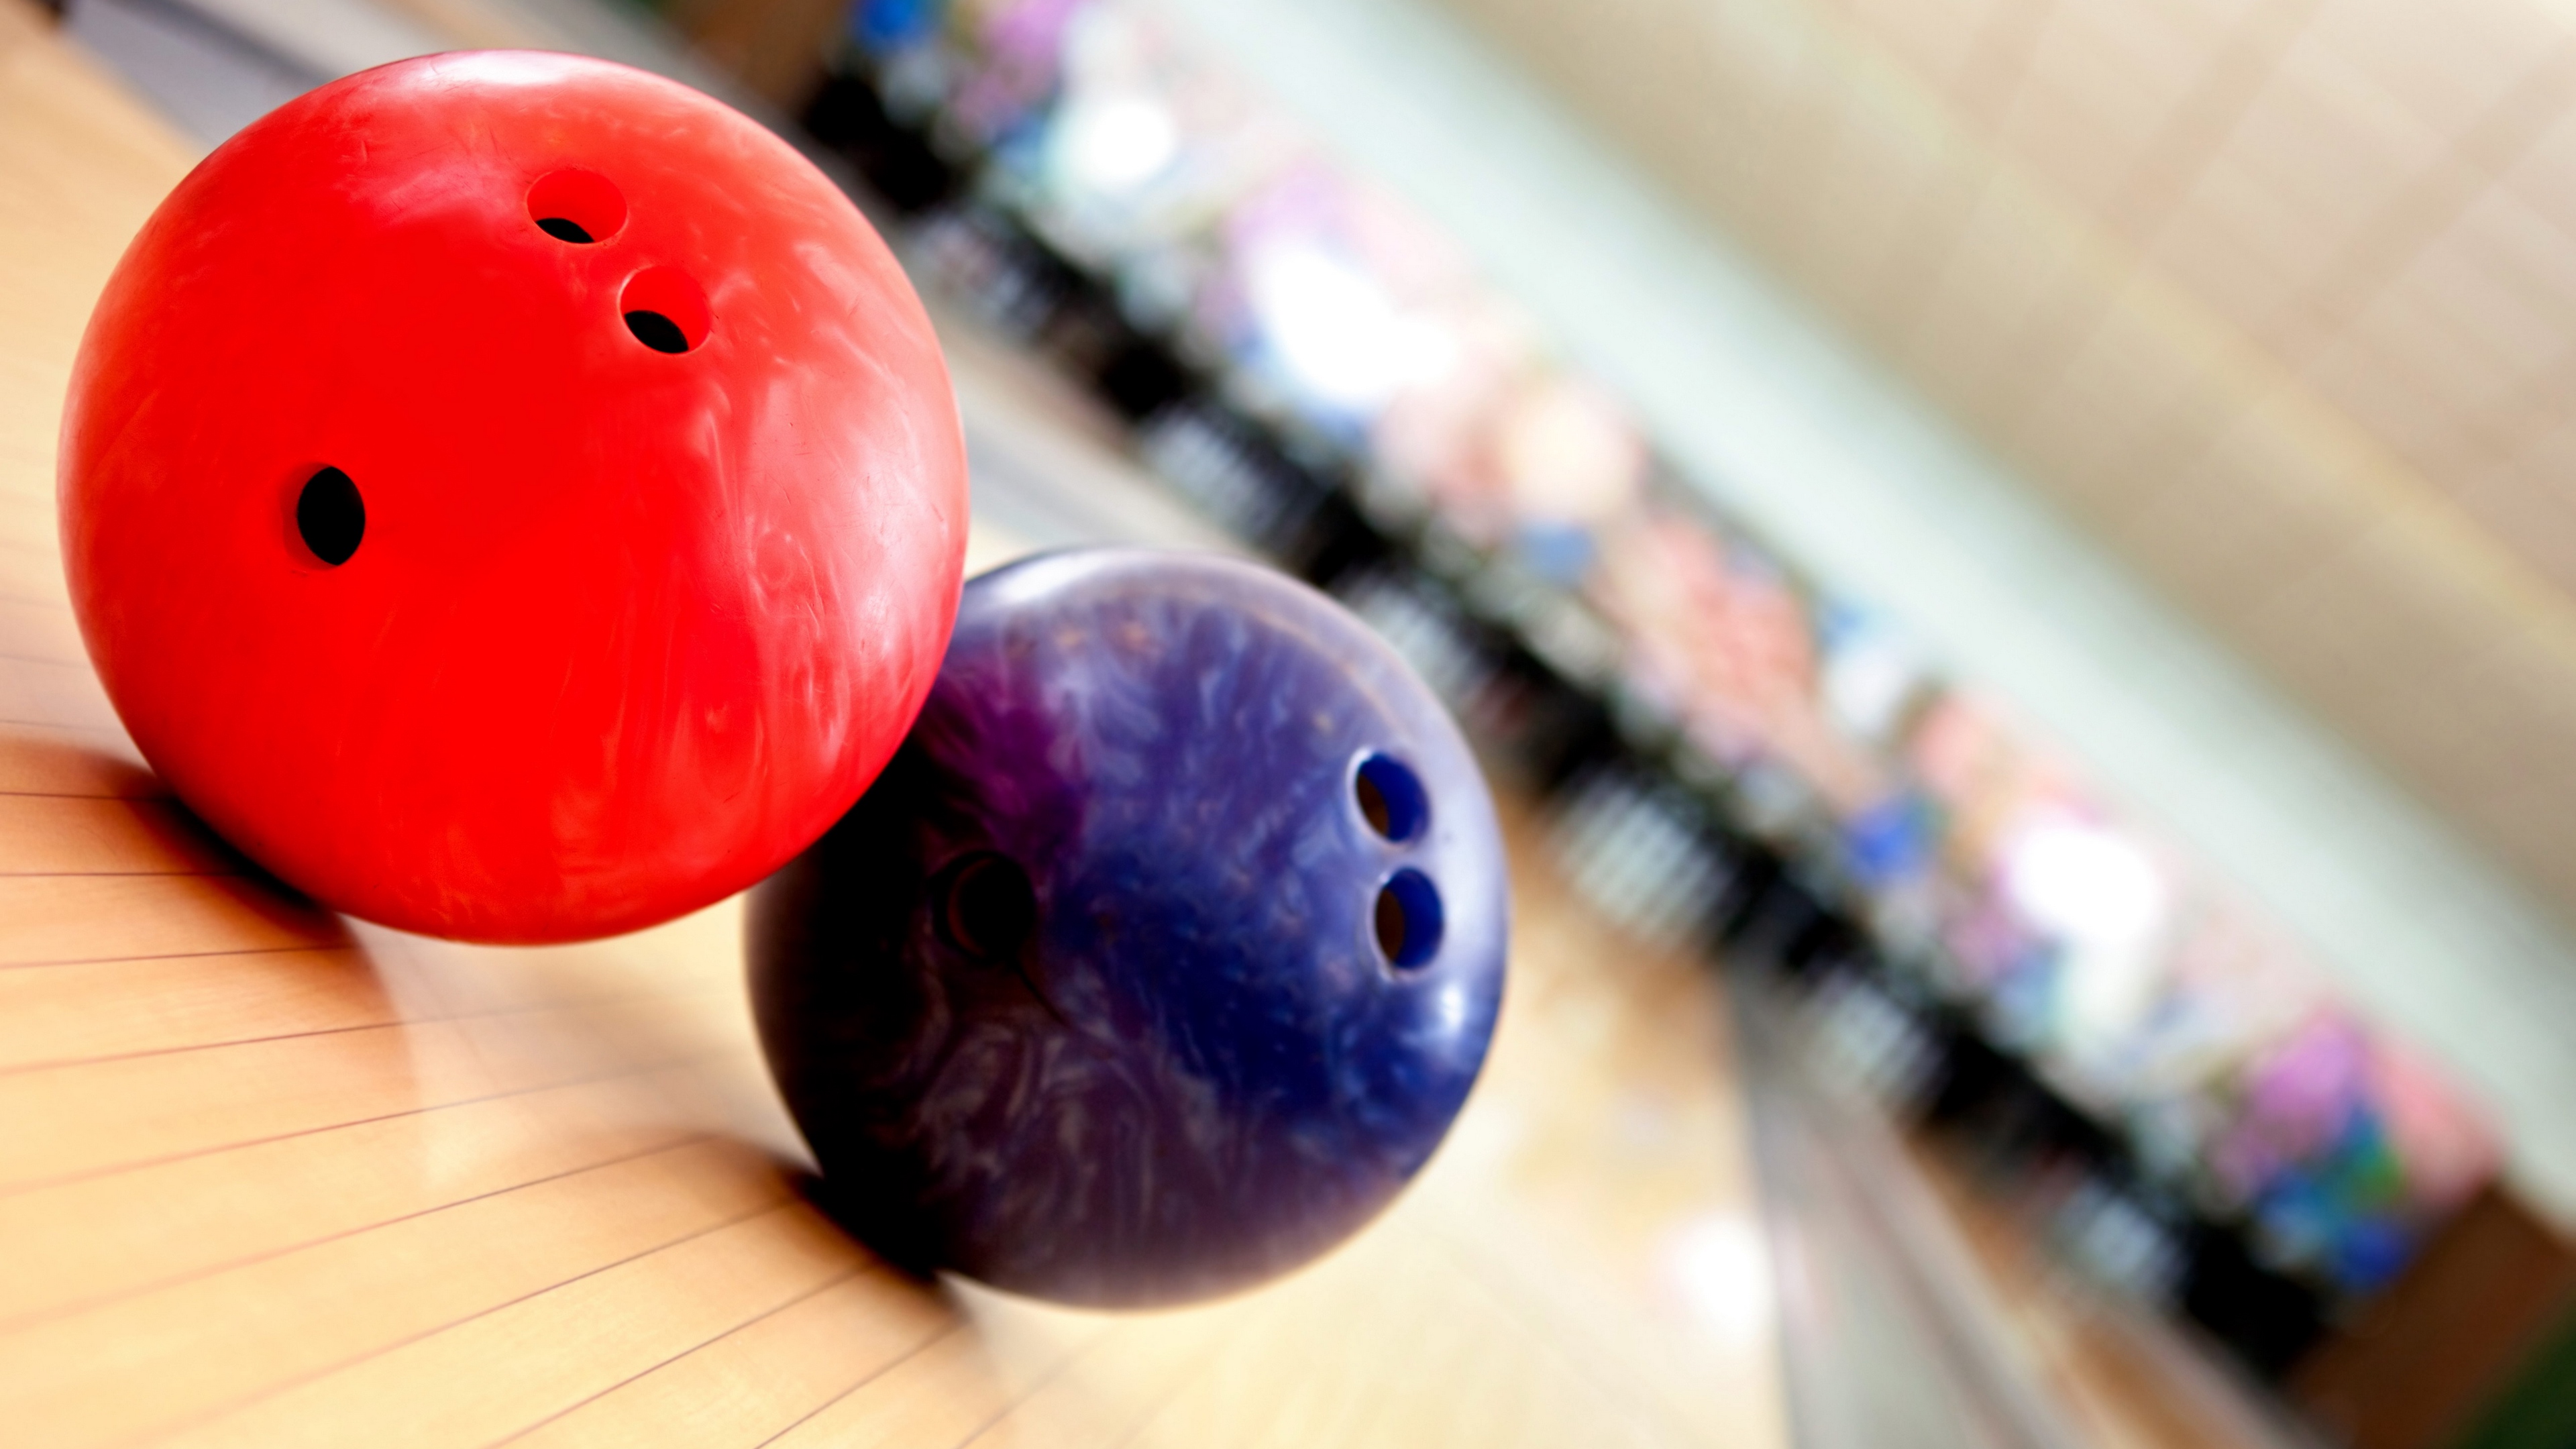 Wallpaper ball, skittles, bowling images for desktop, section спорт -  download